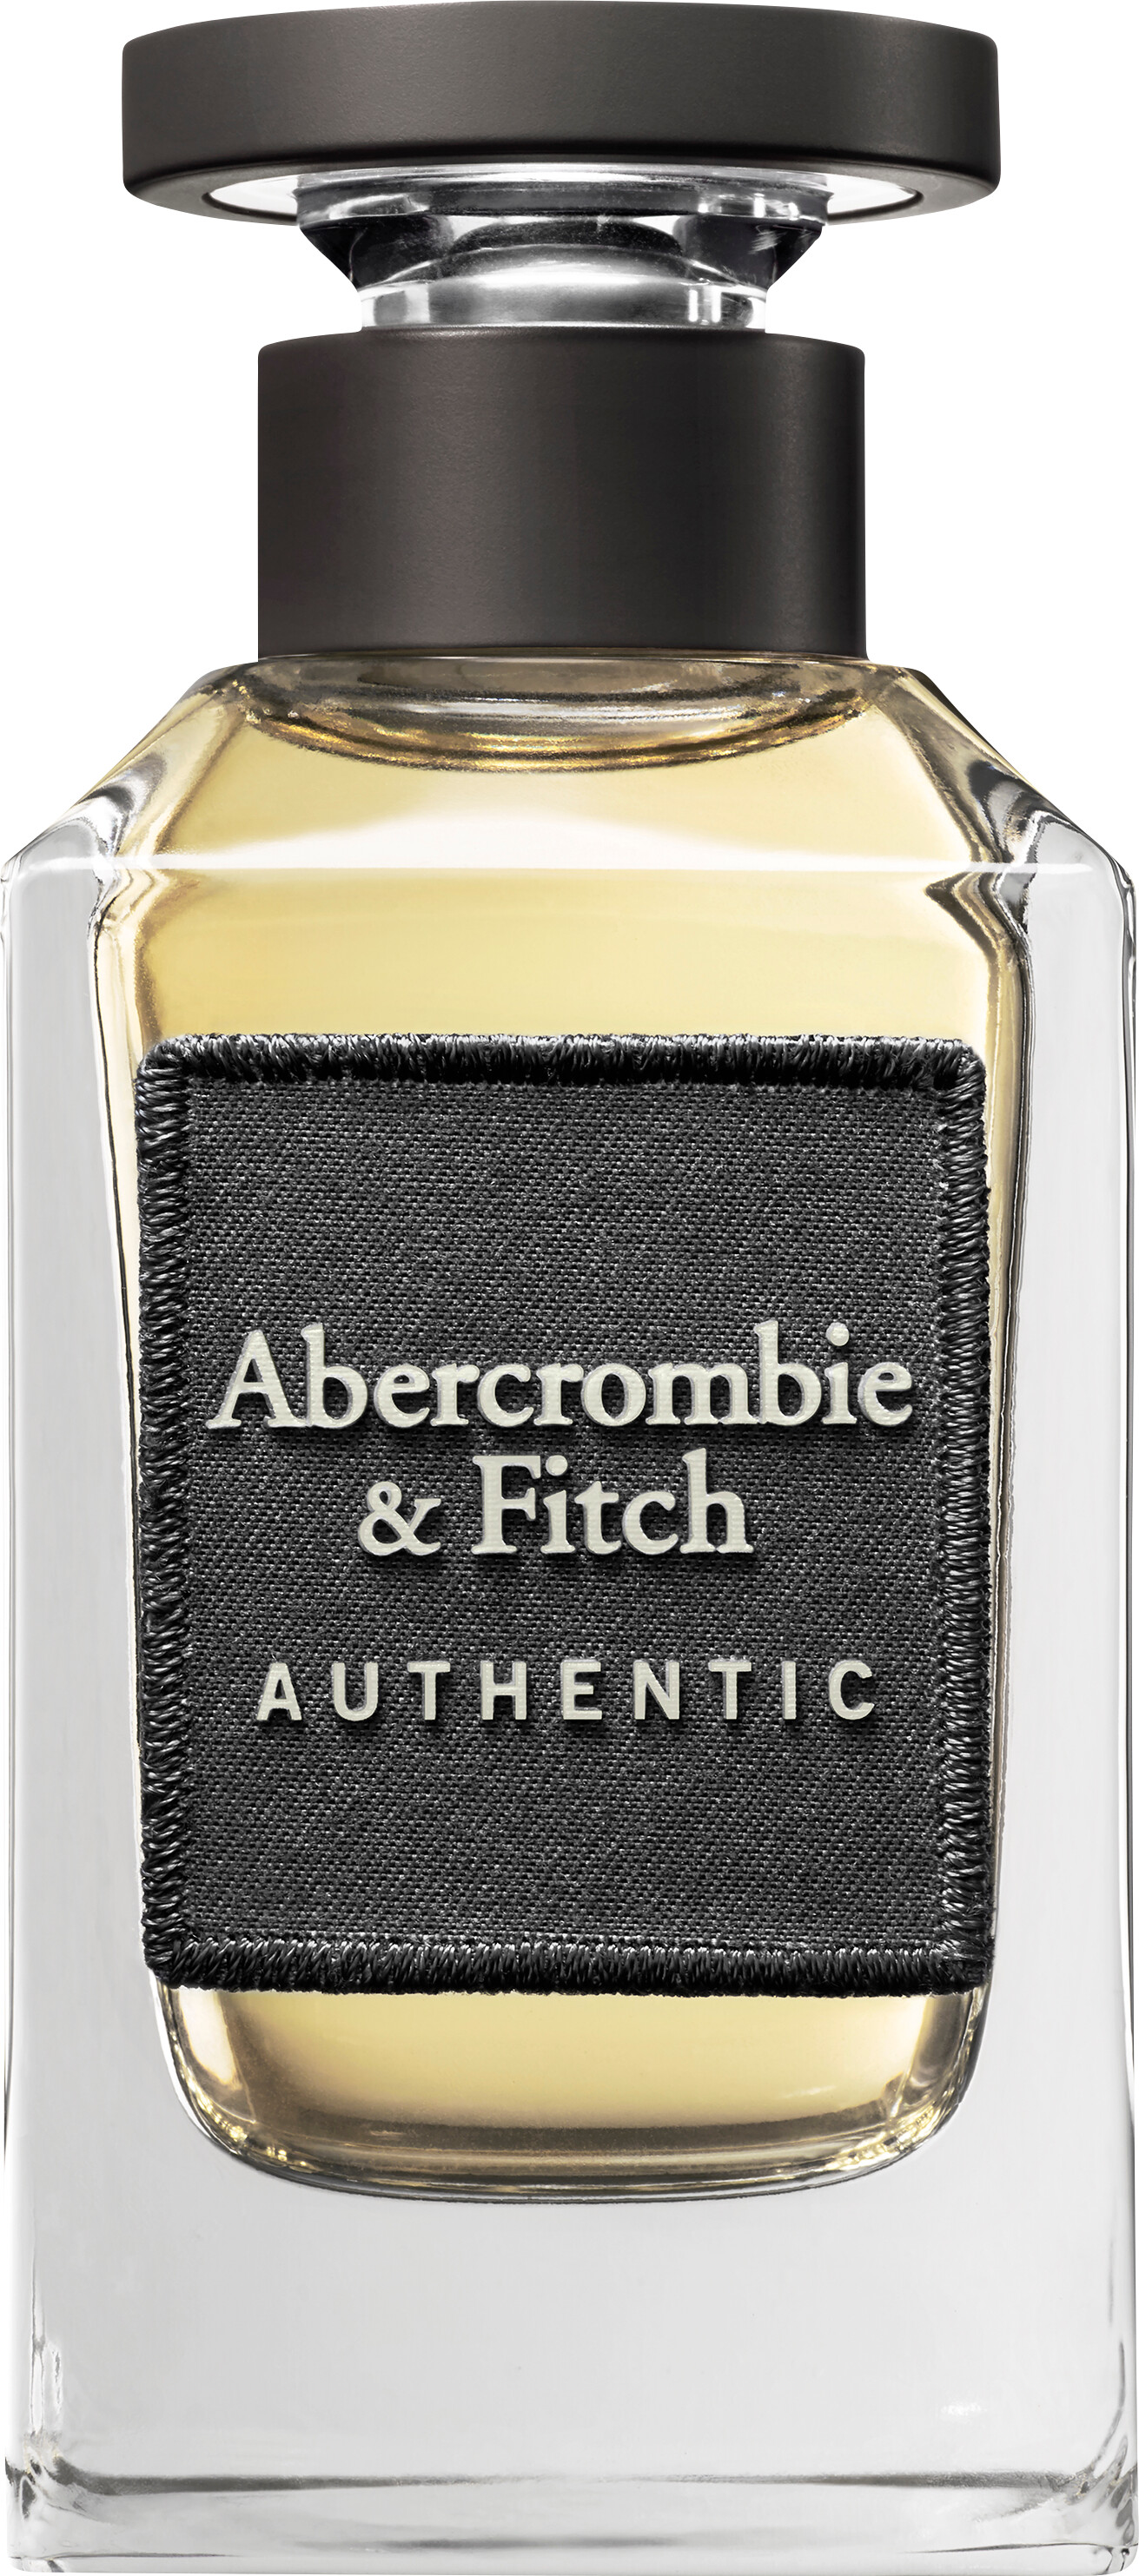 abercrombie & fitch first instinct authentic